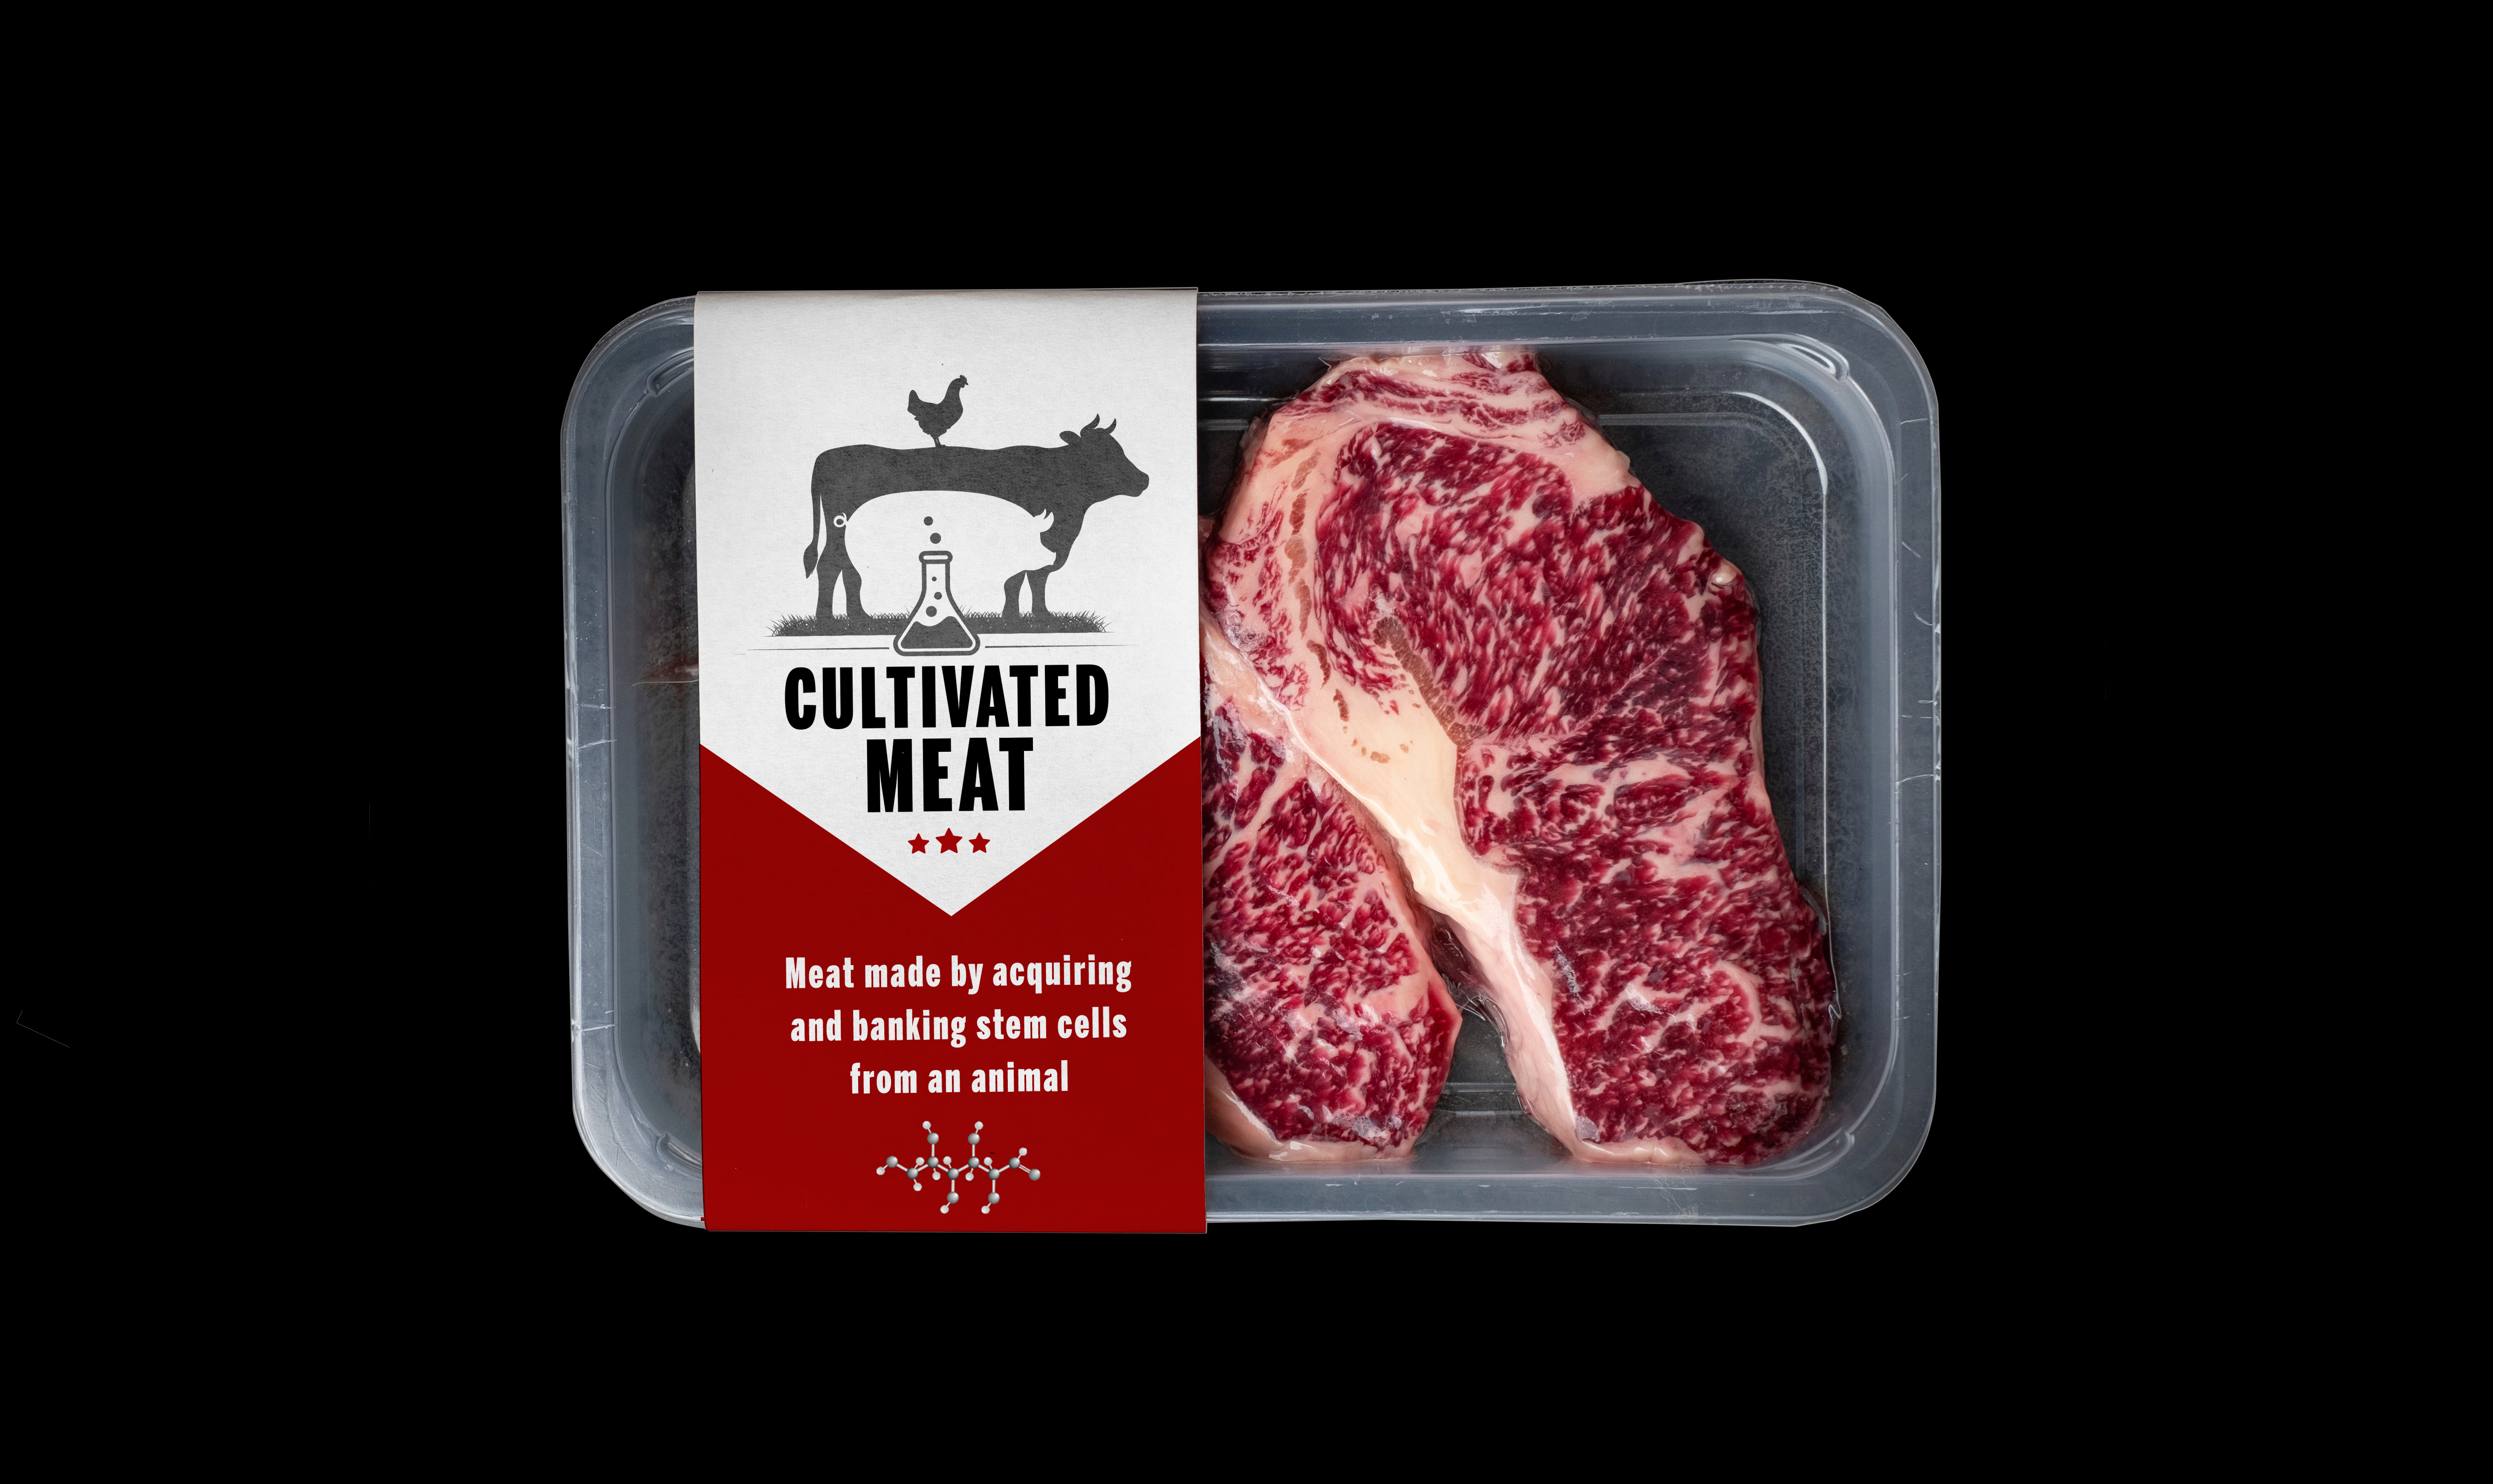 The future of food? Slaughter-free meat (not available for sale yet!) , lab meat